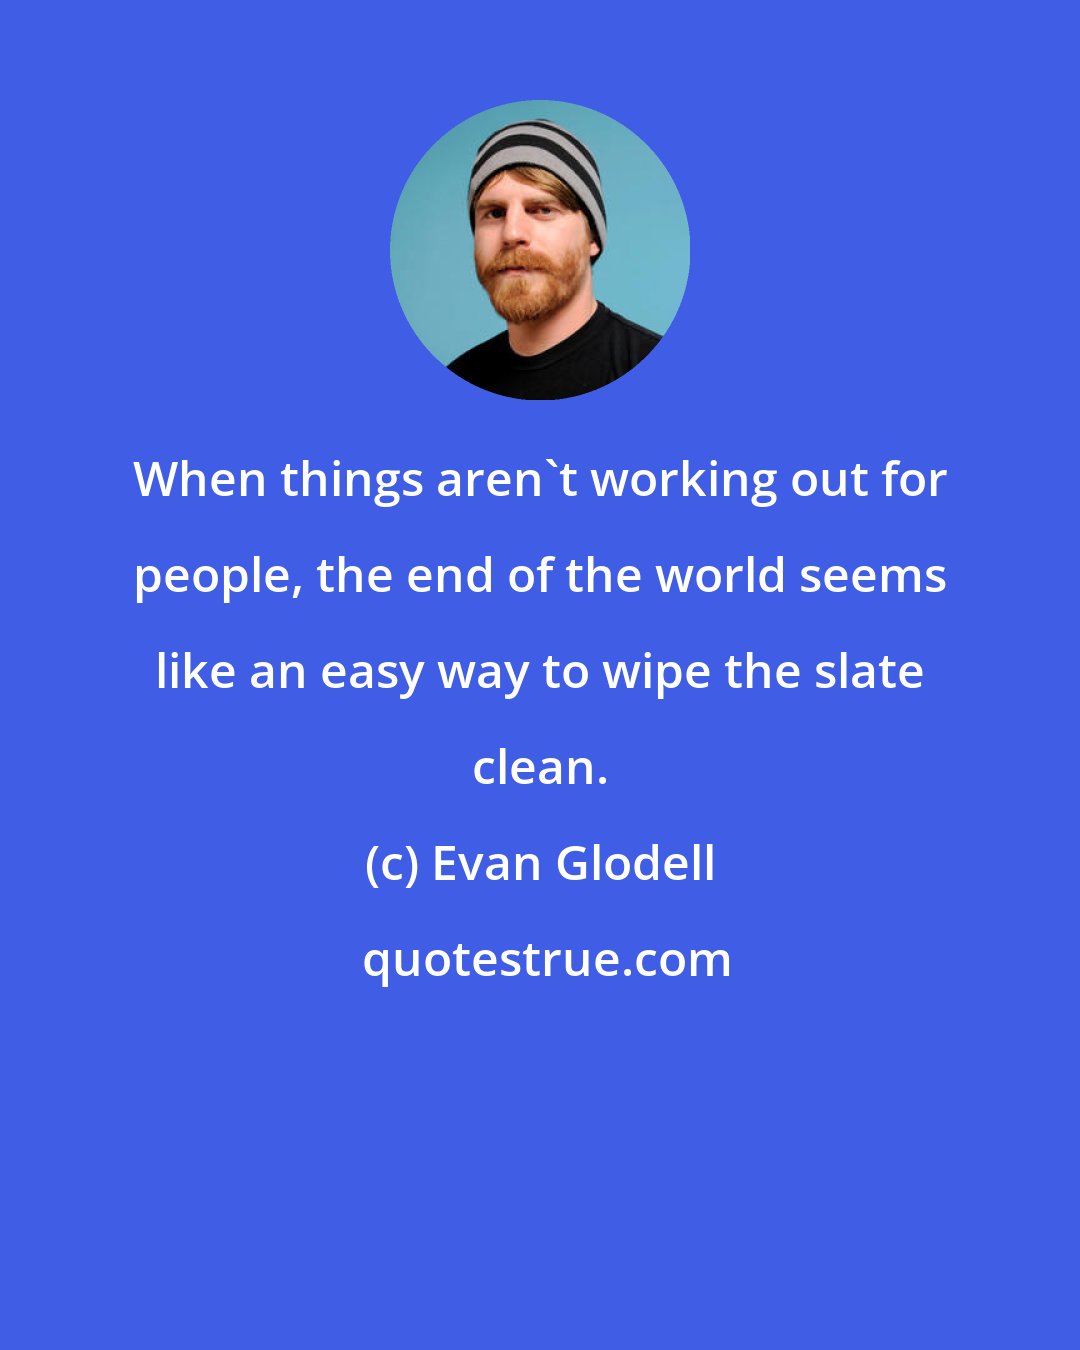 Evan Glodell: When things aren't working out for people, the end of the world seems like an easy way to wipe the slate clean.